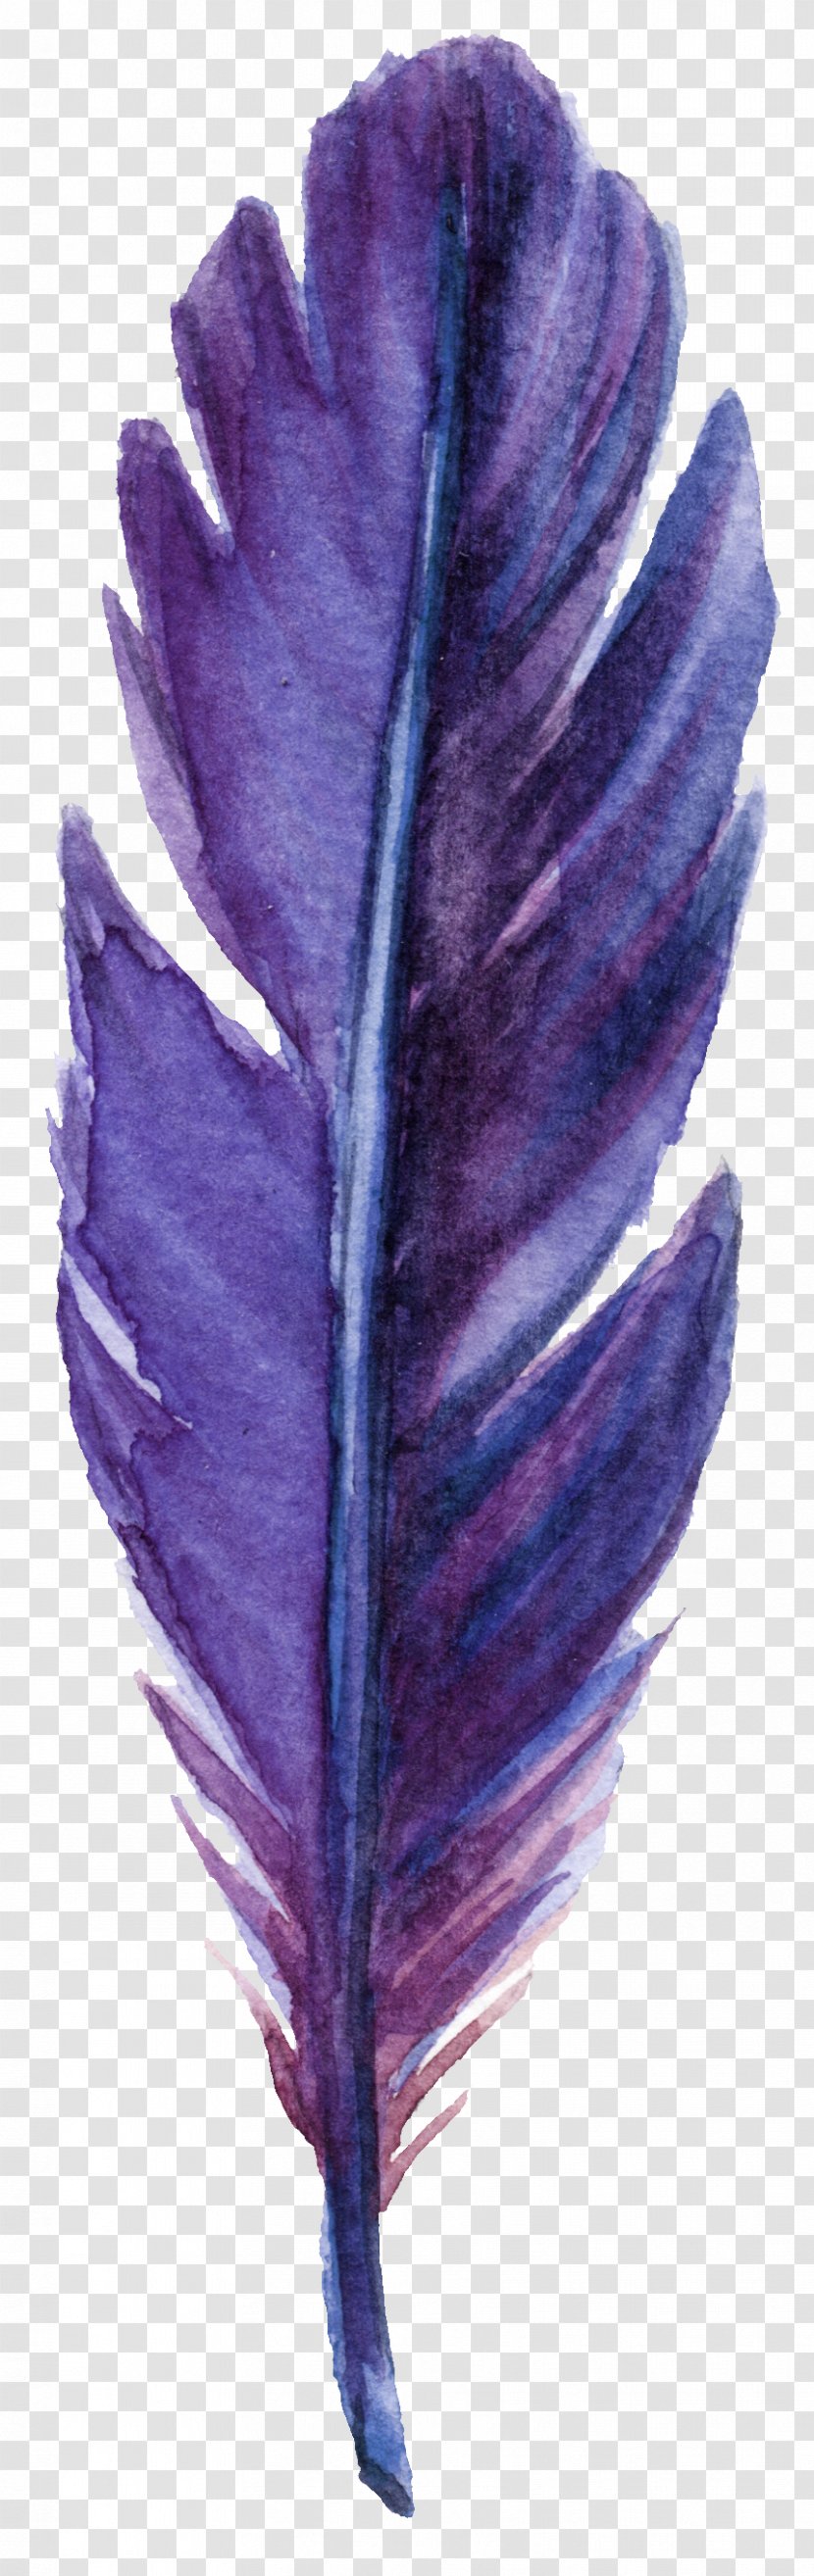 Feather Purple Leaf Green - Flower - Leaves Transparent PNG